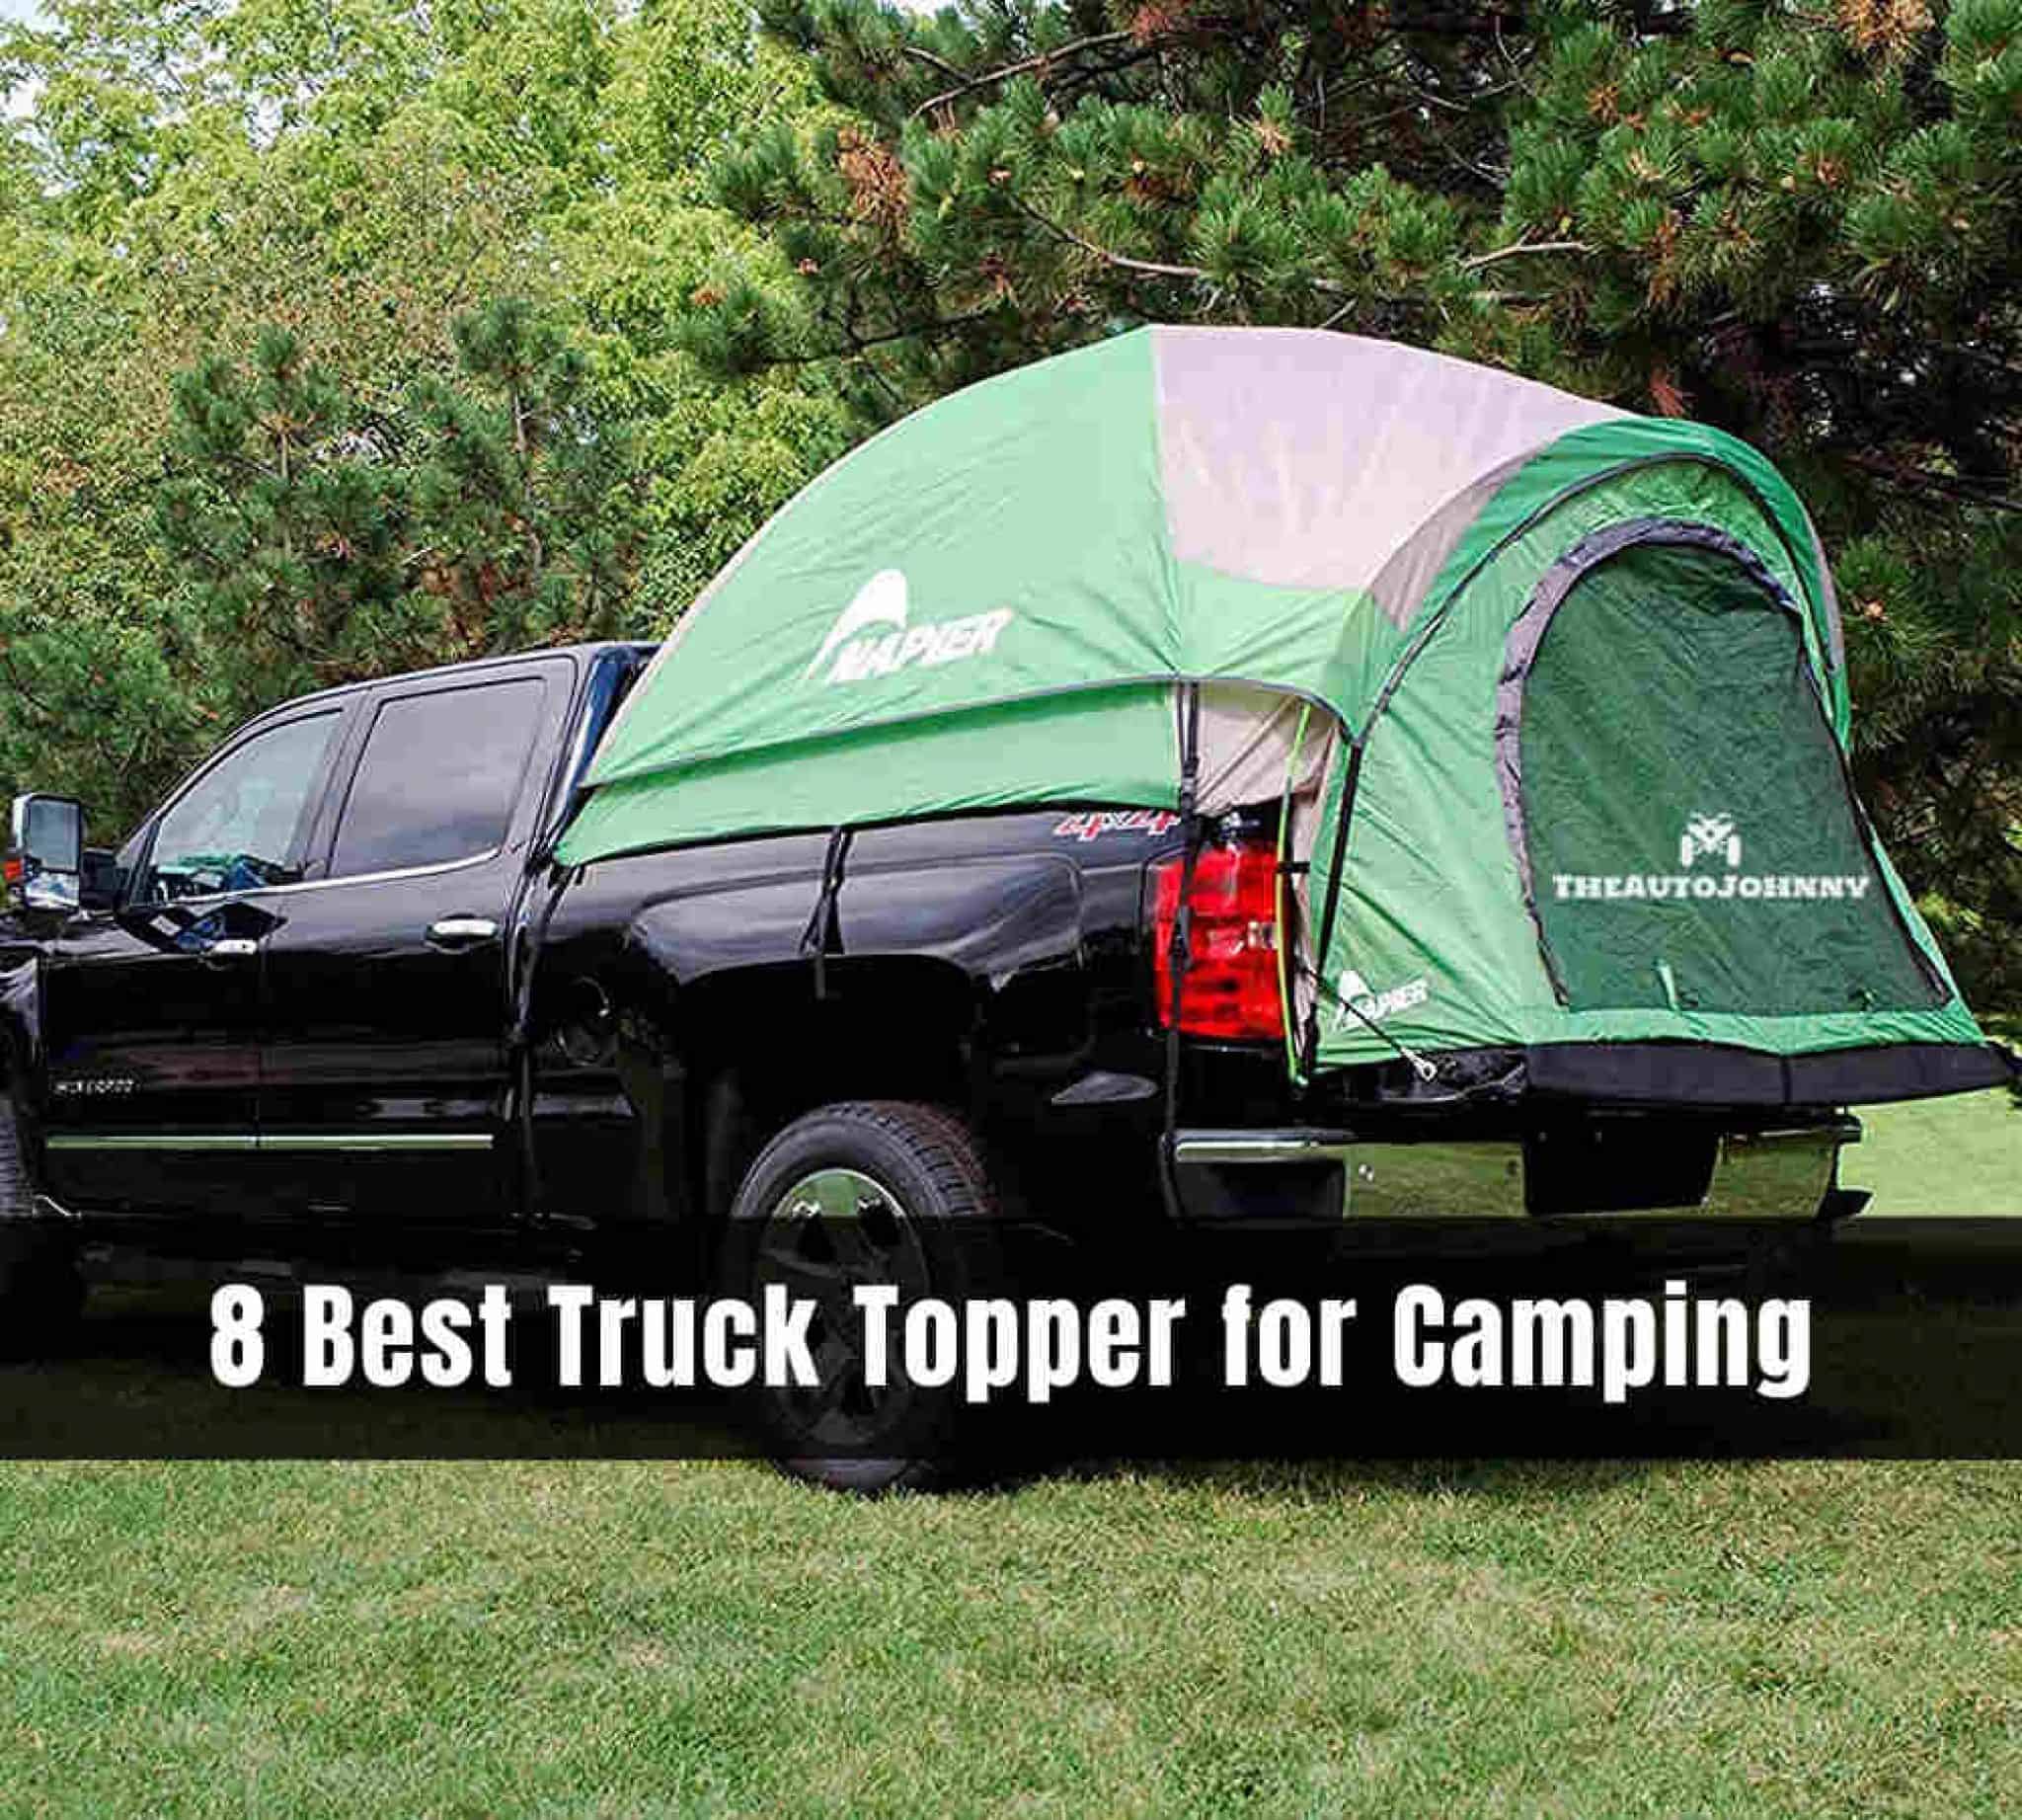 8 Best Truck Topper for Camping 2021 [Reviews & Guide]